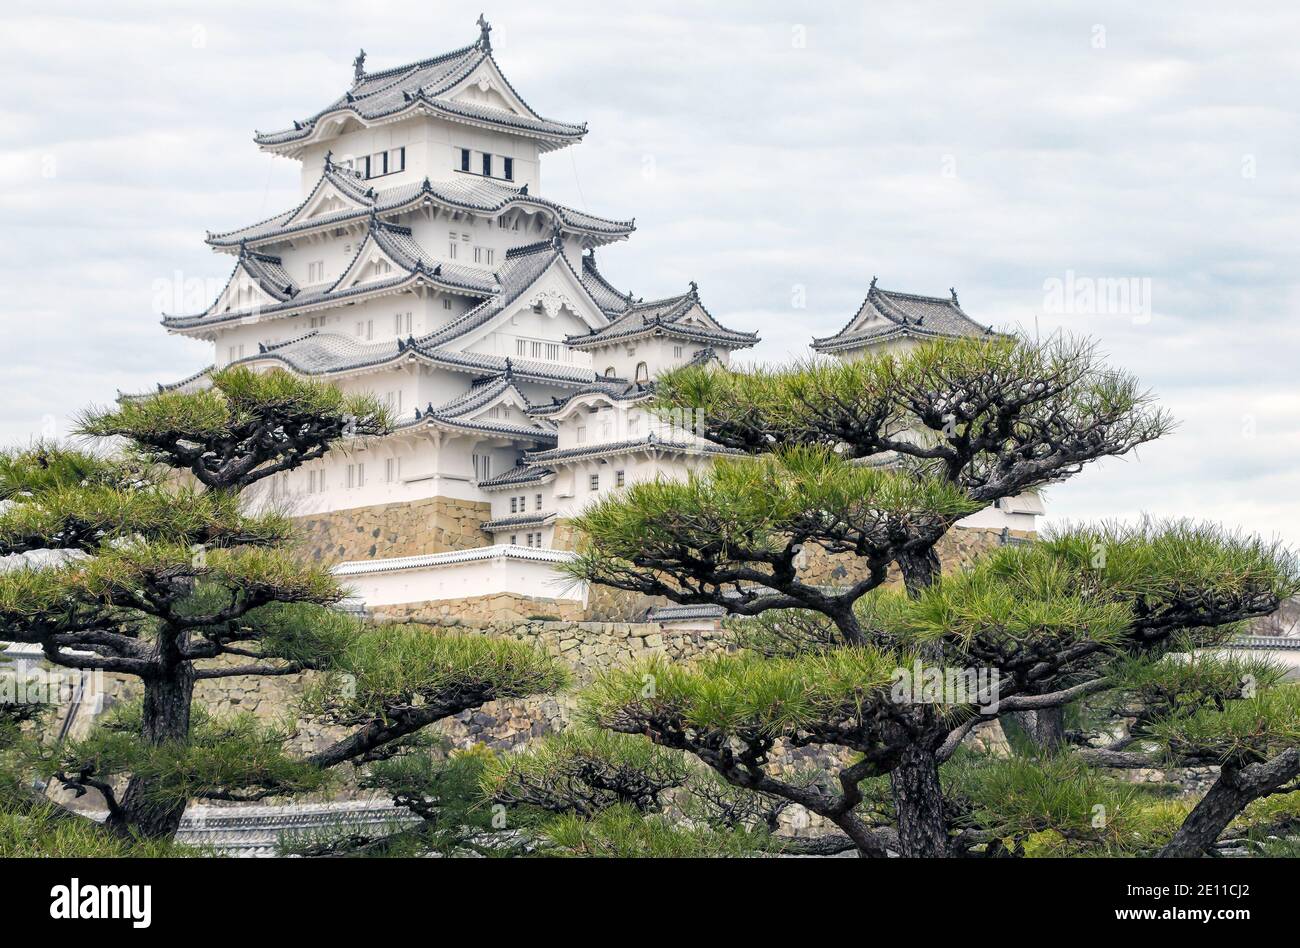 Himeji Castle, a world heritage site in Hyogo prefecture in Japan. Medieval traditional Japanese architecture with old pine trees in foreground Stock Photo